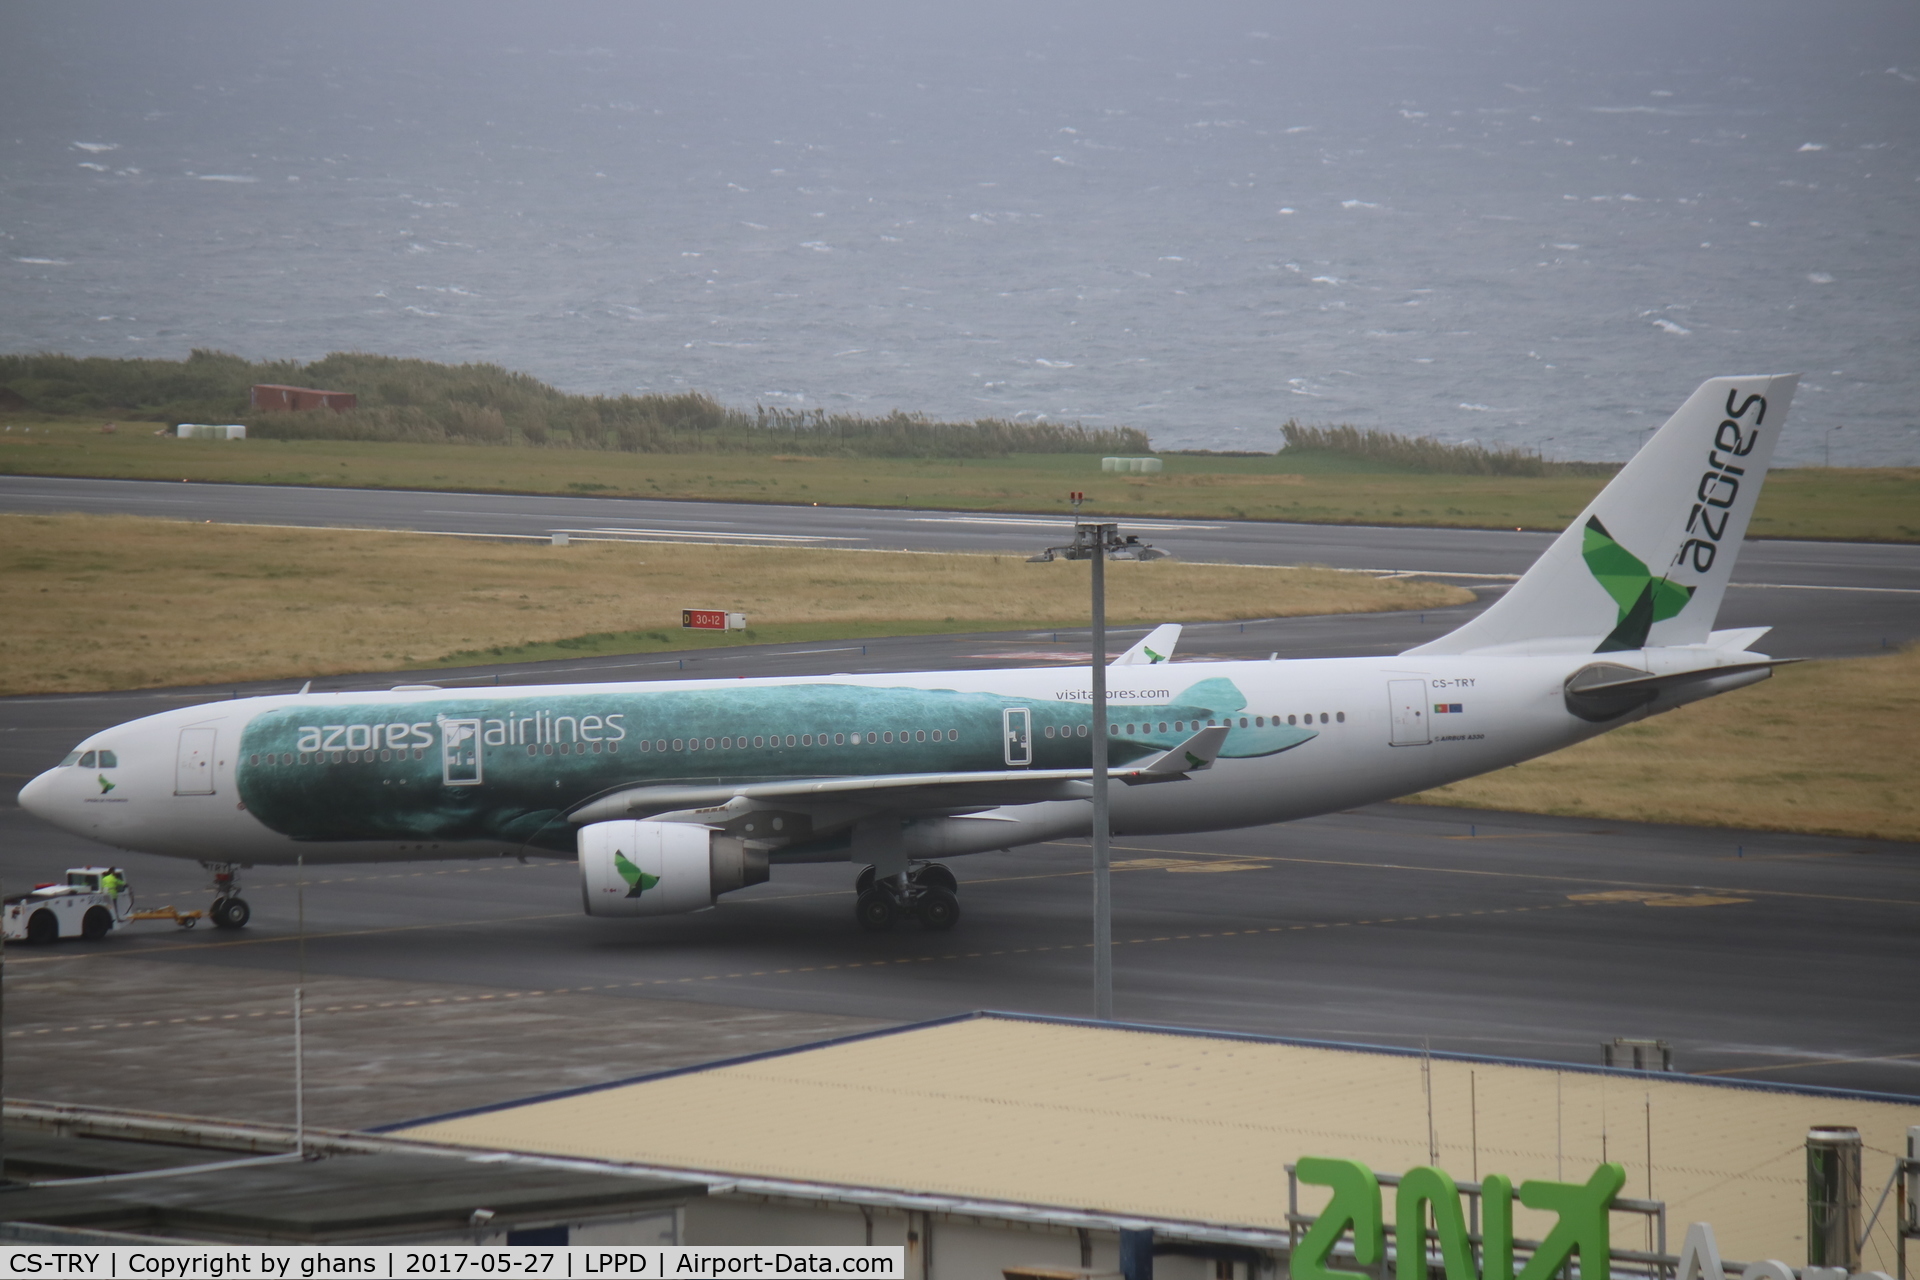 CS-TRY, 2008 Airbus A330-223 C/N 970, Pushed back